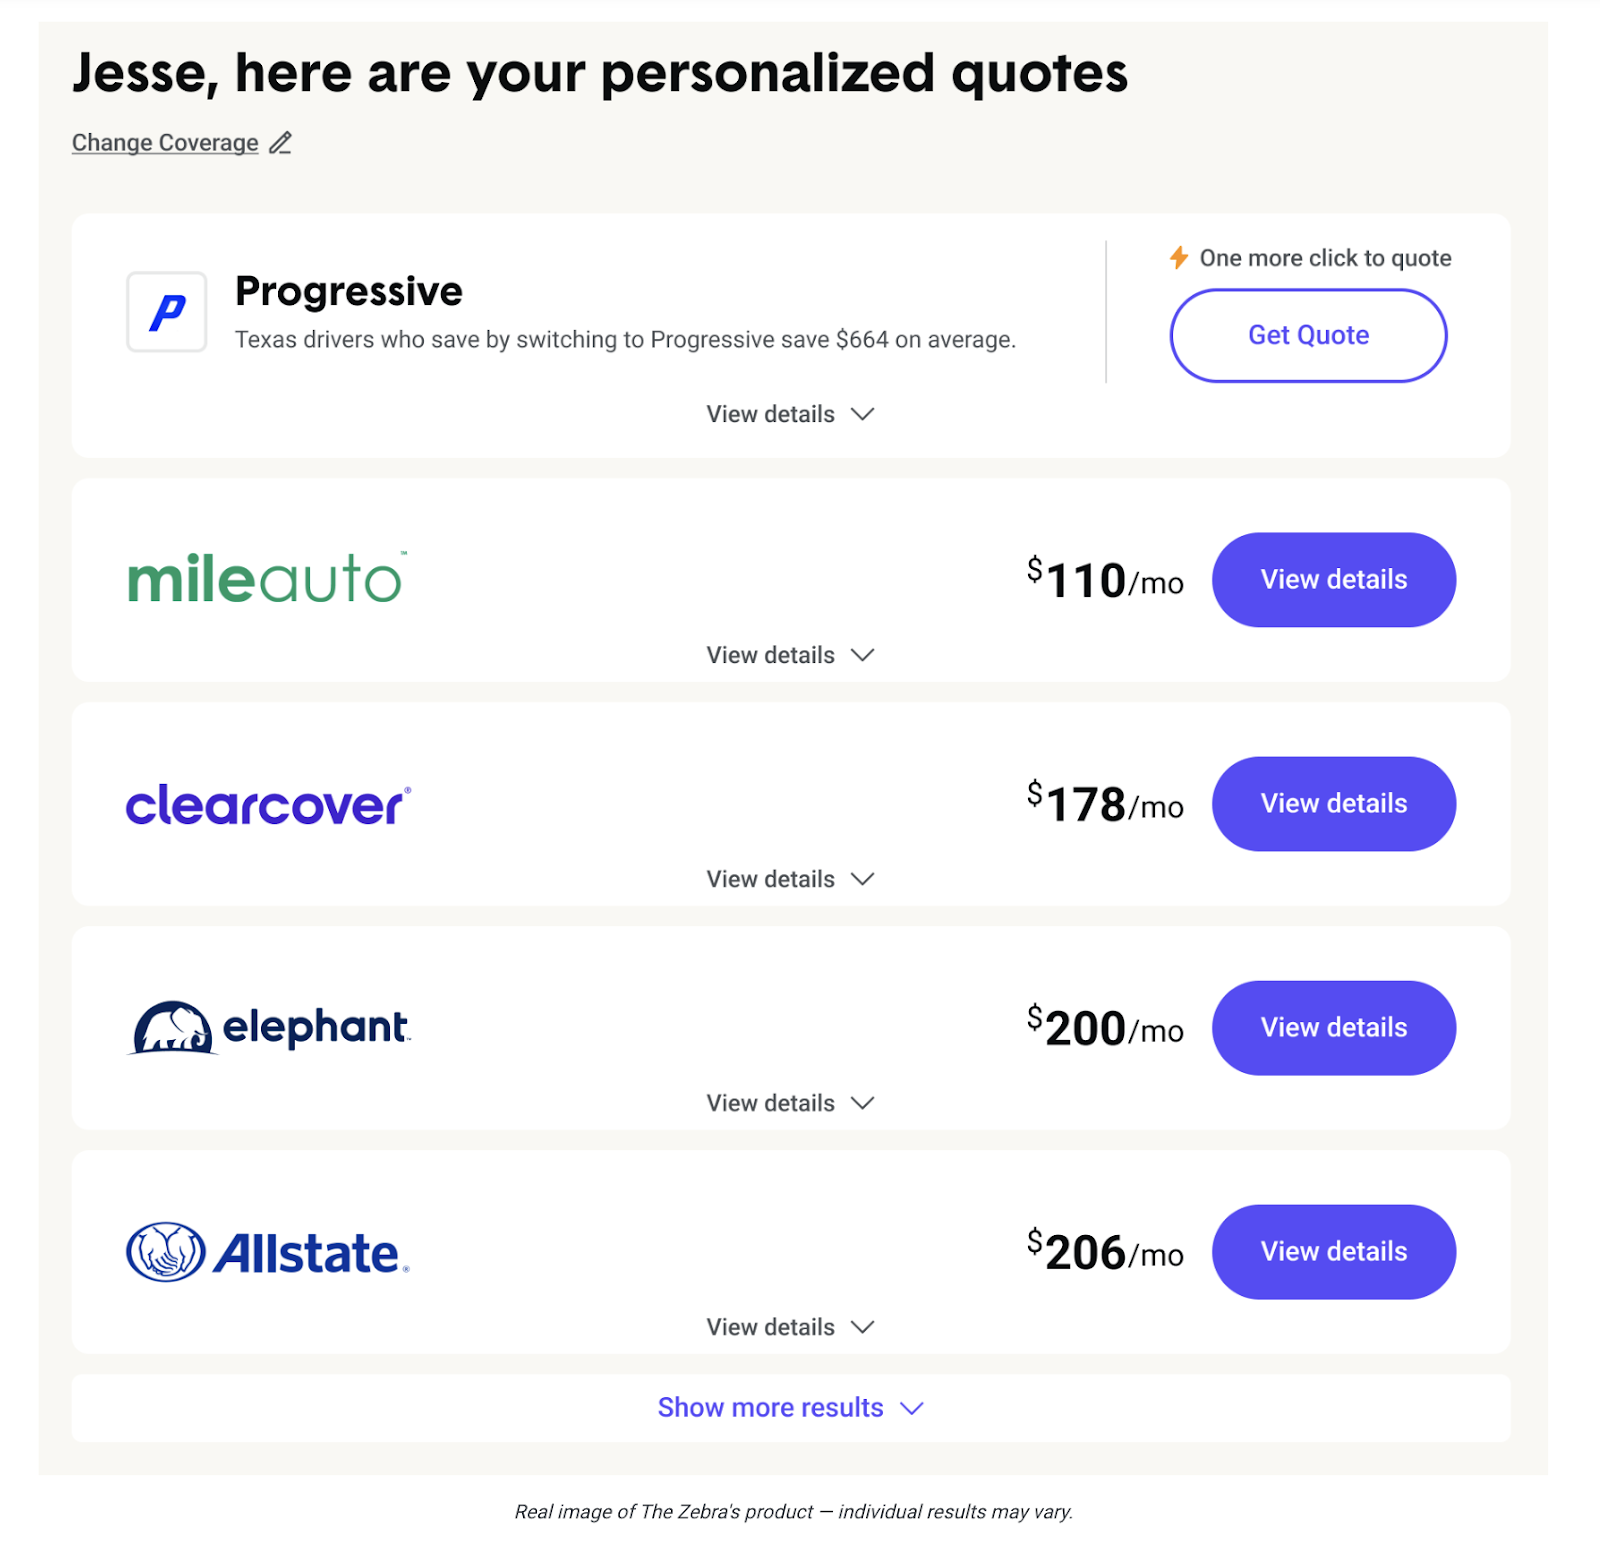 Screenshot of personalized quotes from The Zebra